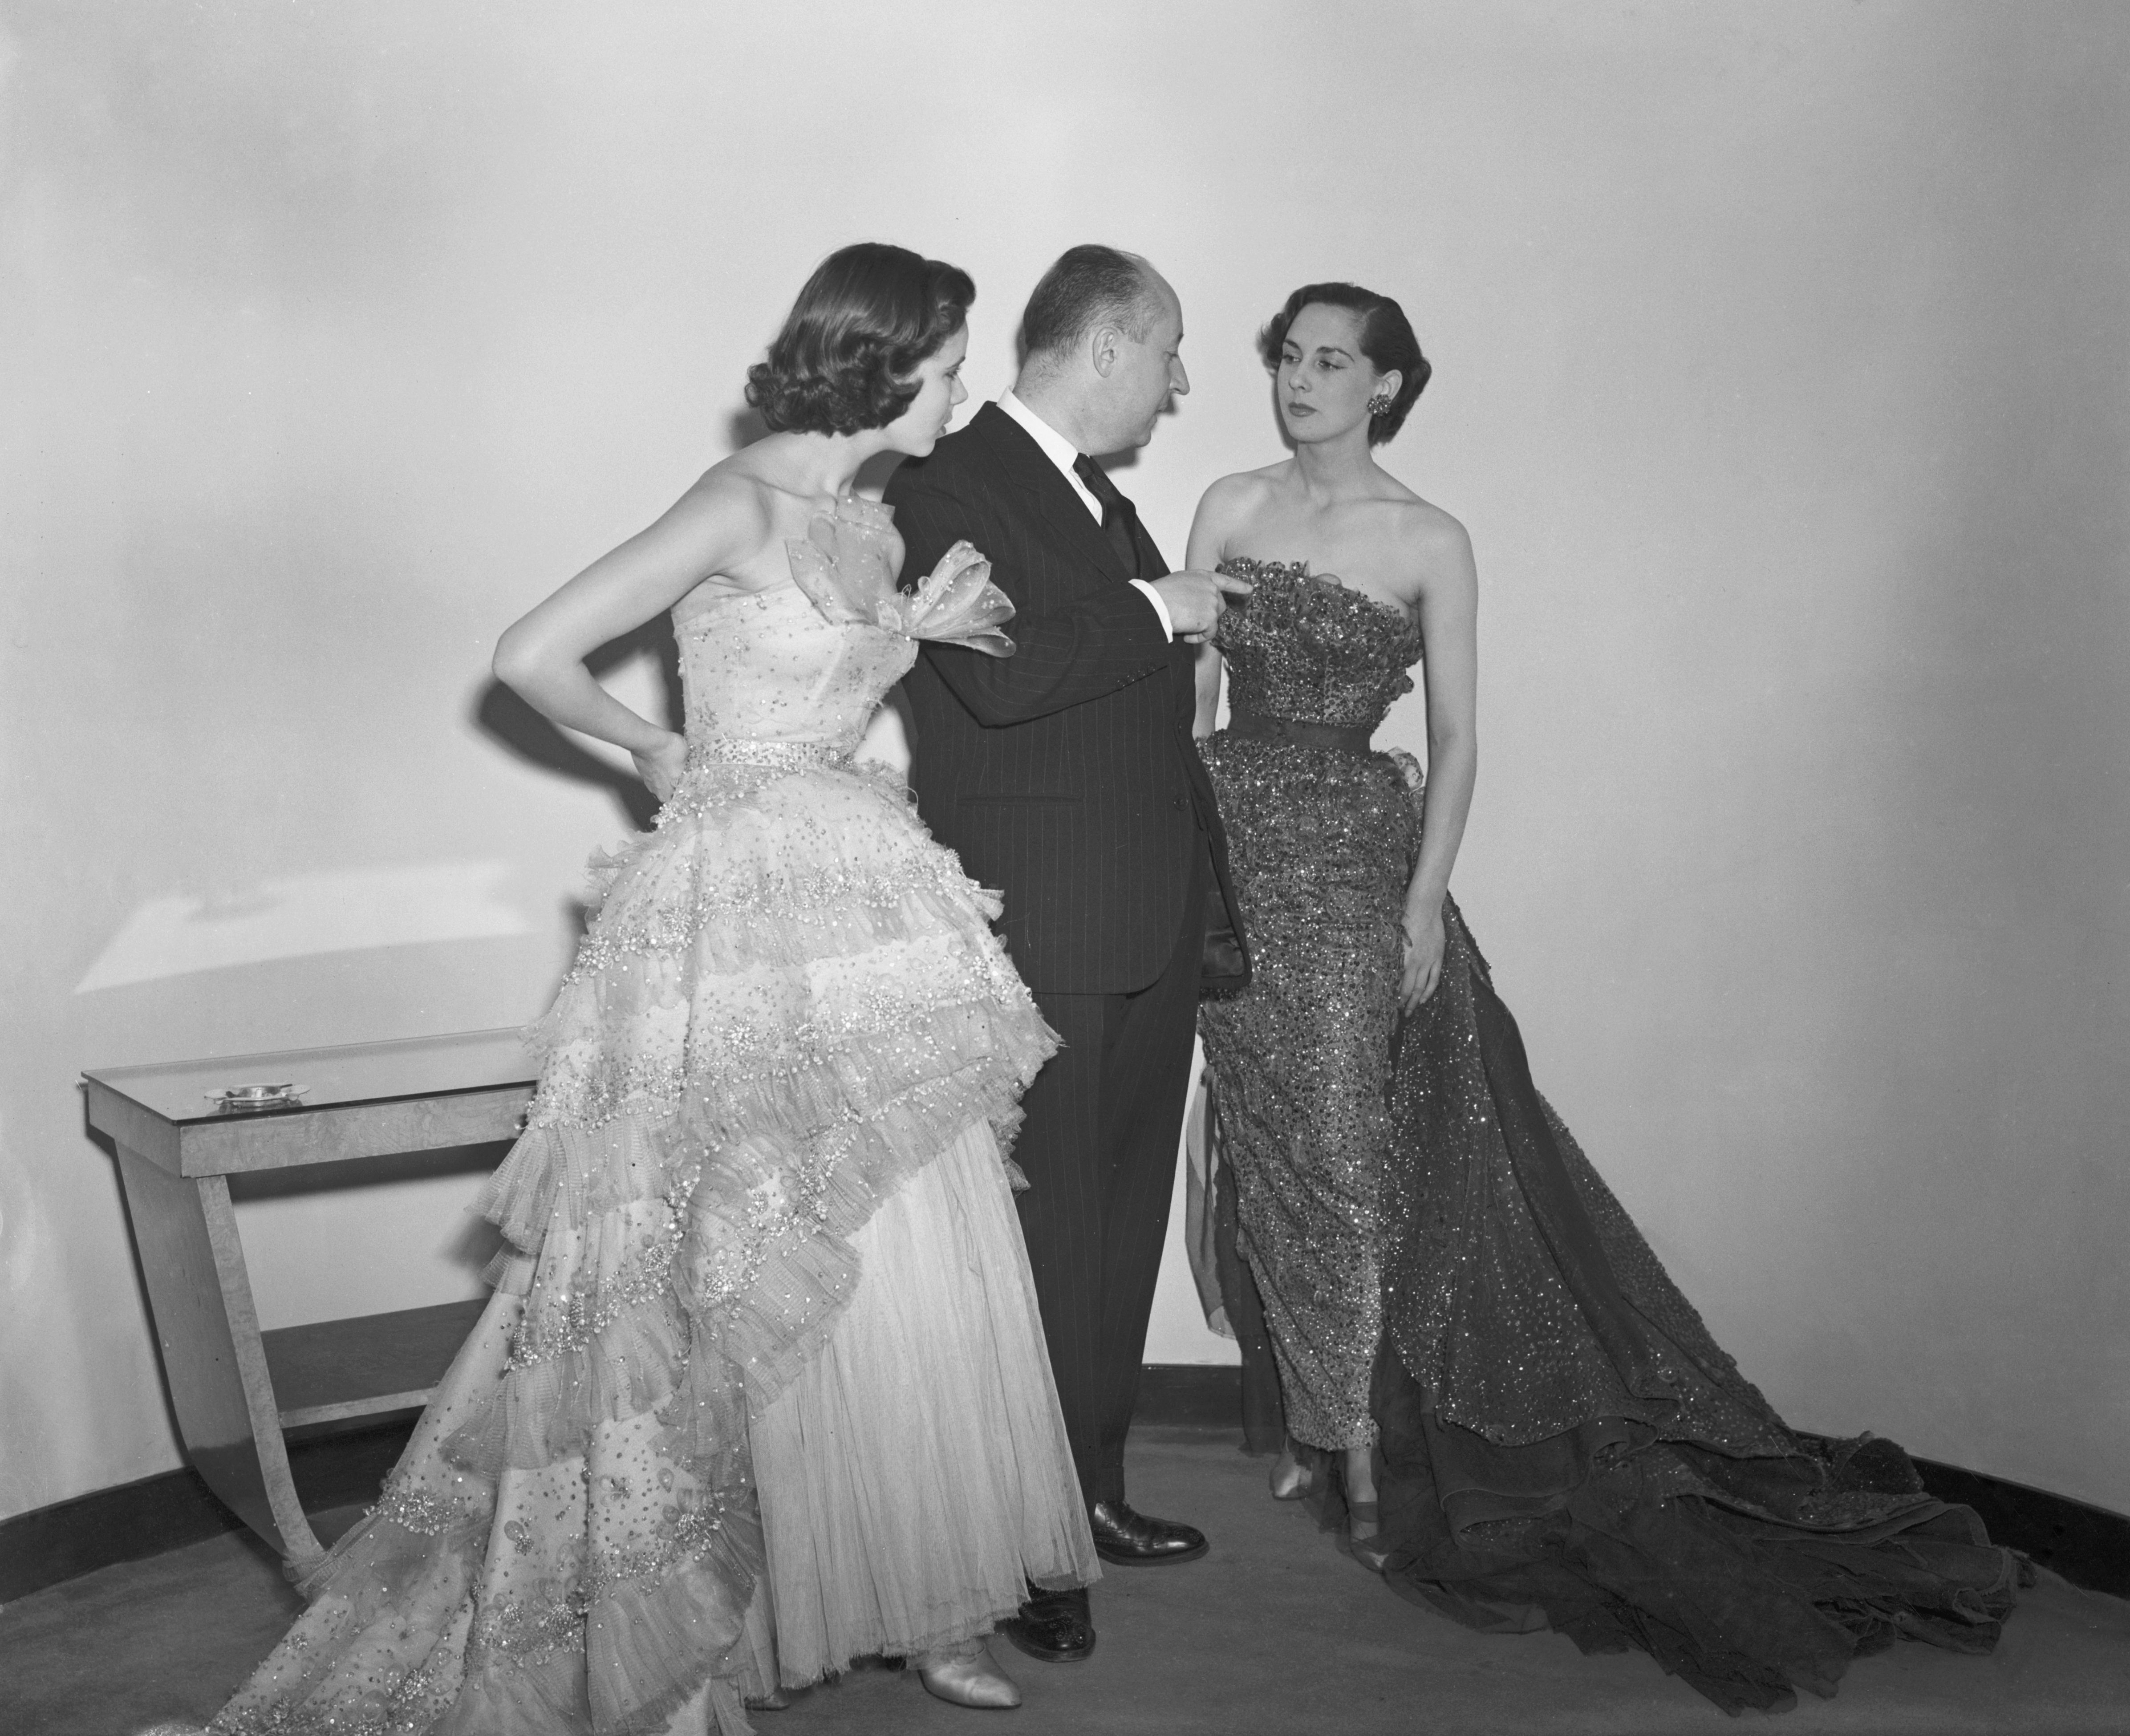 French fashion designer Christian Dior (1905 - 1957) with two of his models at a show of ninety new Dior creations at the Savoy hotel, London, 24th April 1950. Sylvie (left) models 'Mozart', a champagne tulle evening gown embroidered with diamante and straw. Russian model, Tania, models 'Debussy', a dark blue evening gown in tulle with sequins of the same colour. (Photo by Fred Ramage/Keystone/Hulton Archive/Getty Images)